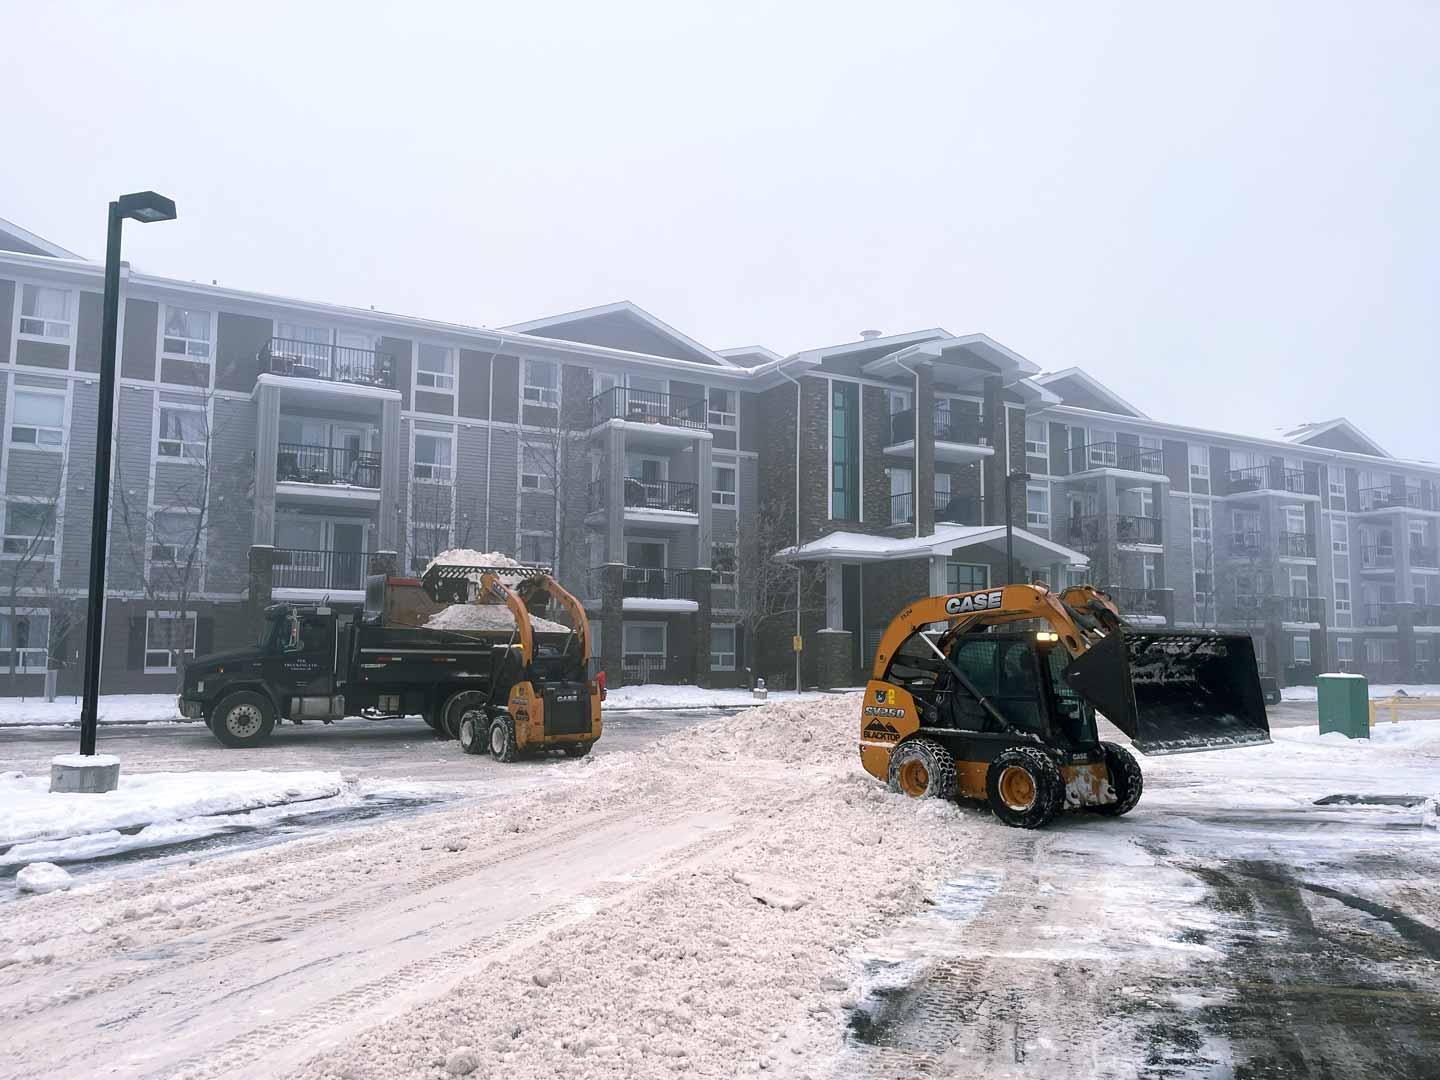 Skid steers removing snow and hauling snow away in parking lot complex in Edmonton Alberta.